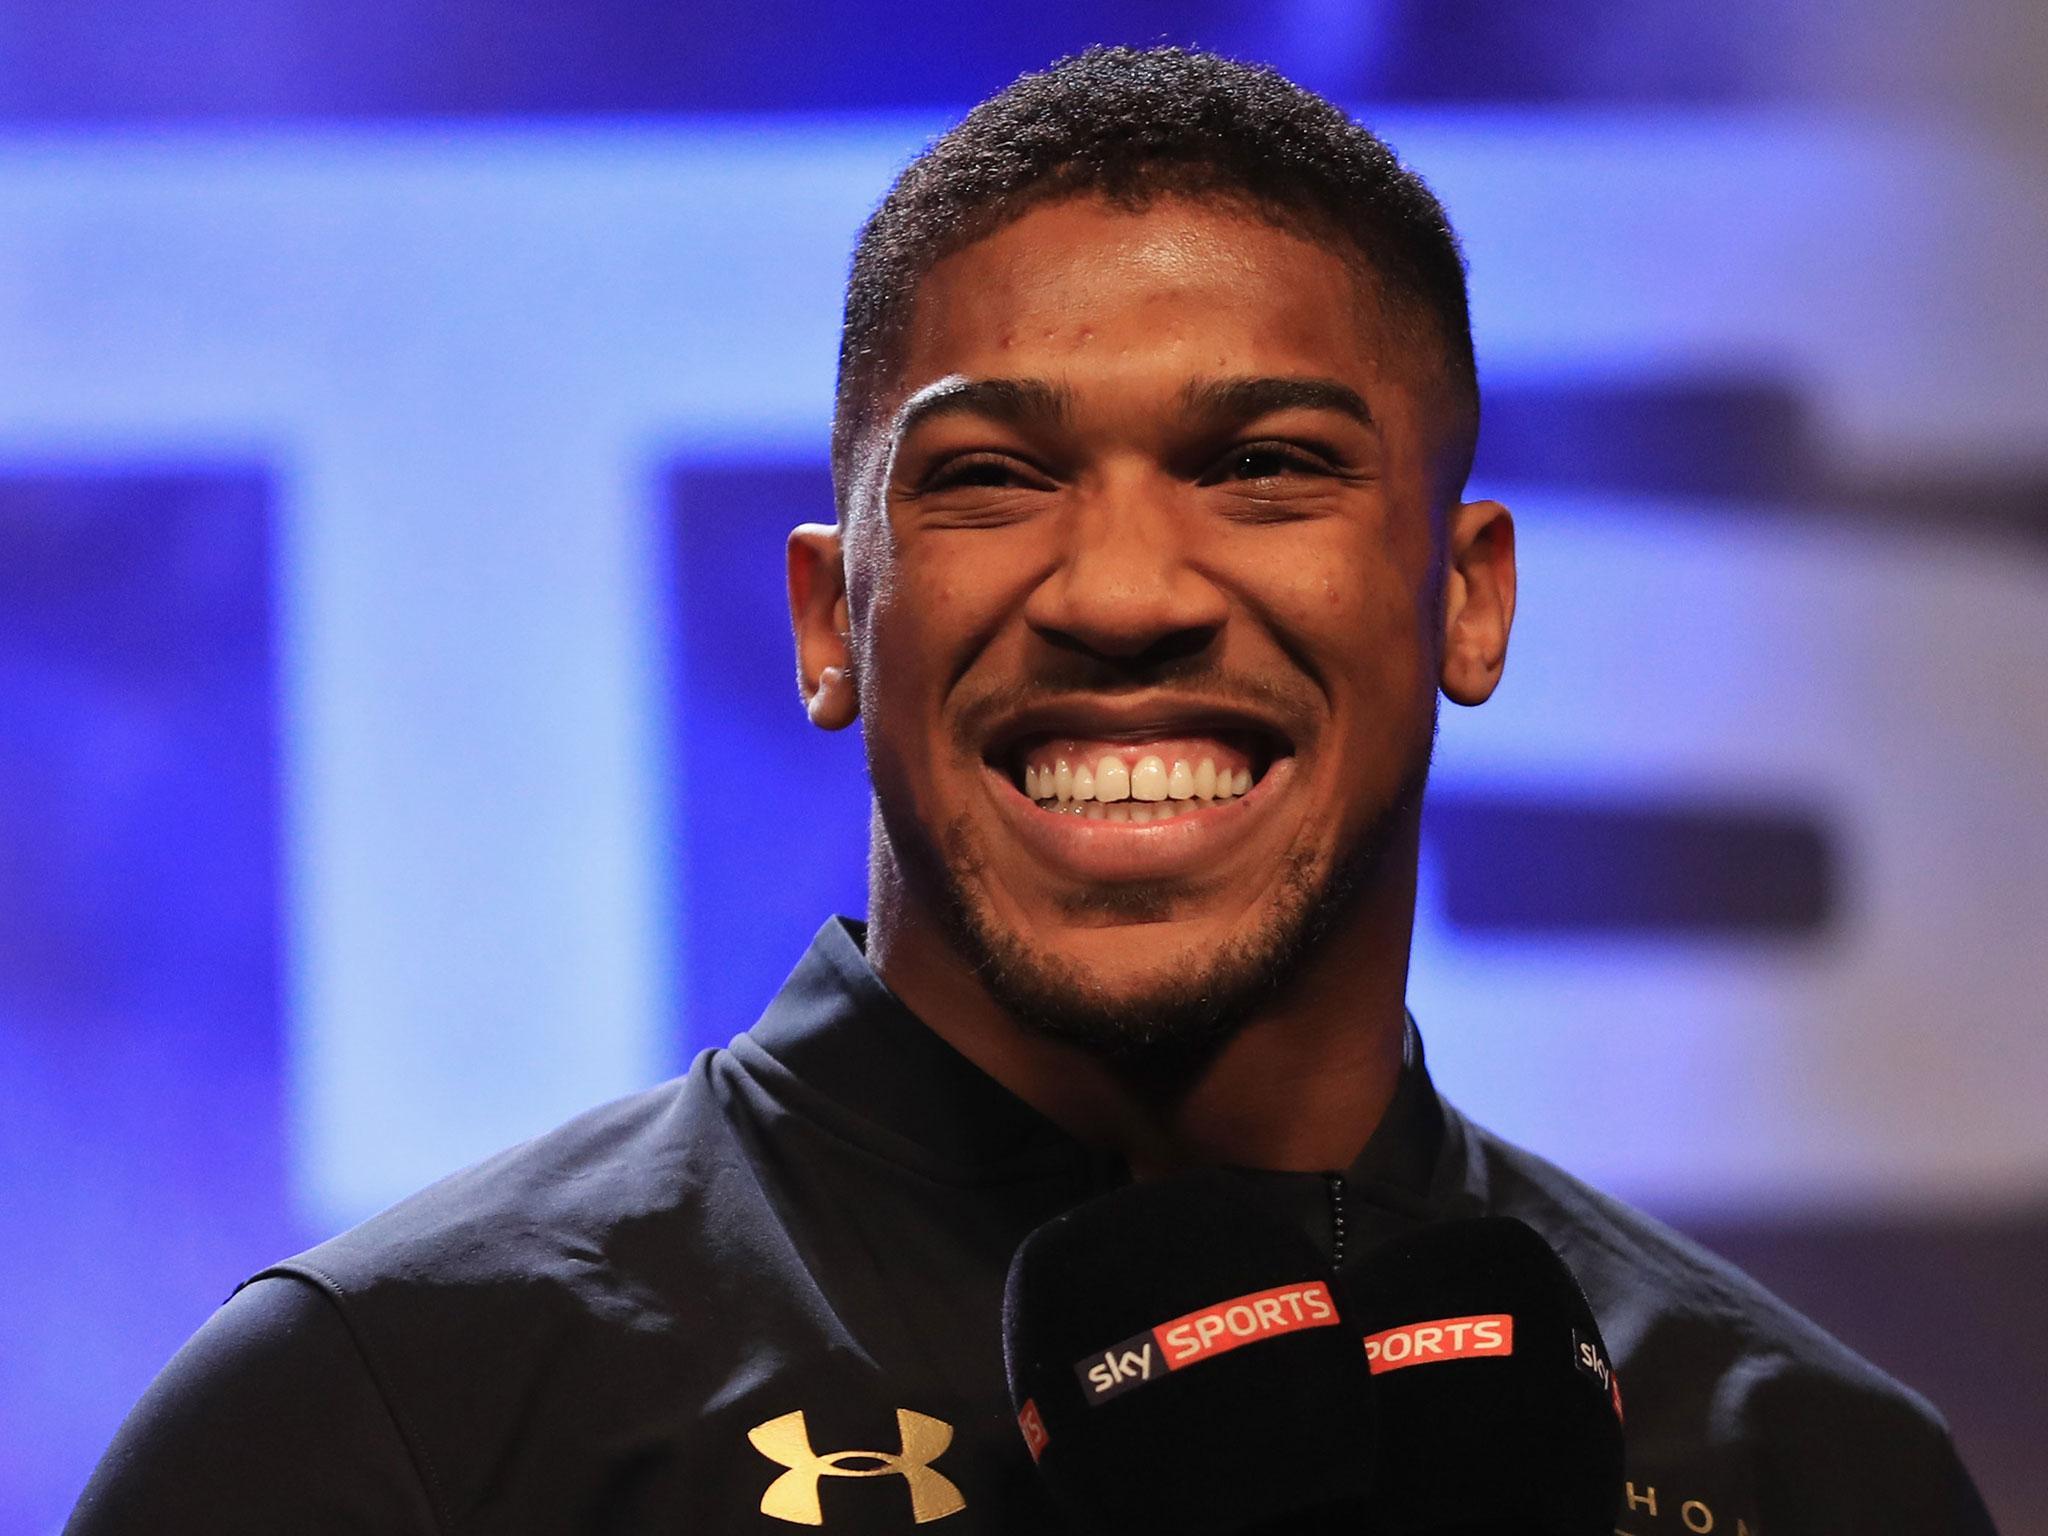 Anthony Joshua would be open to fighting an MMA star in a ring or a cage